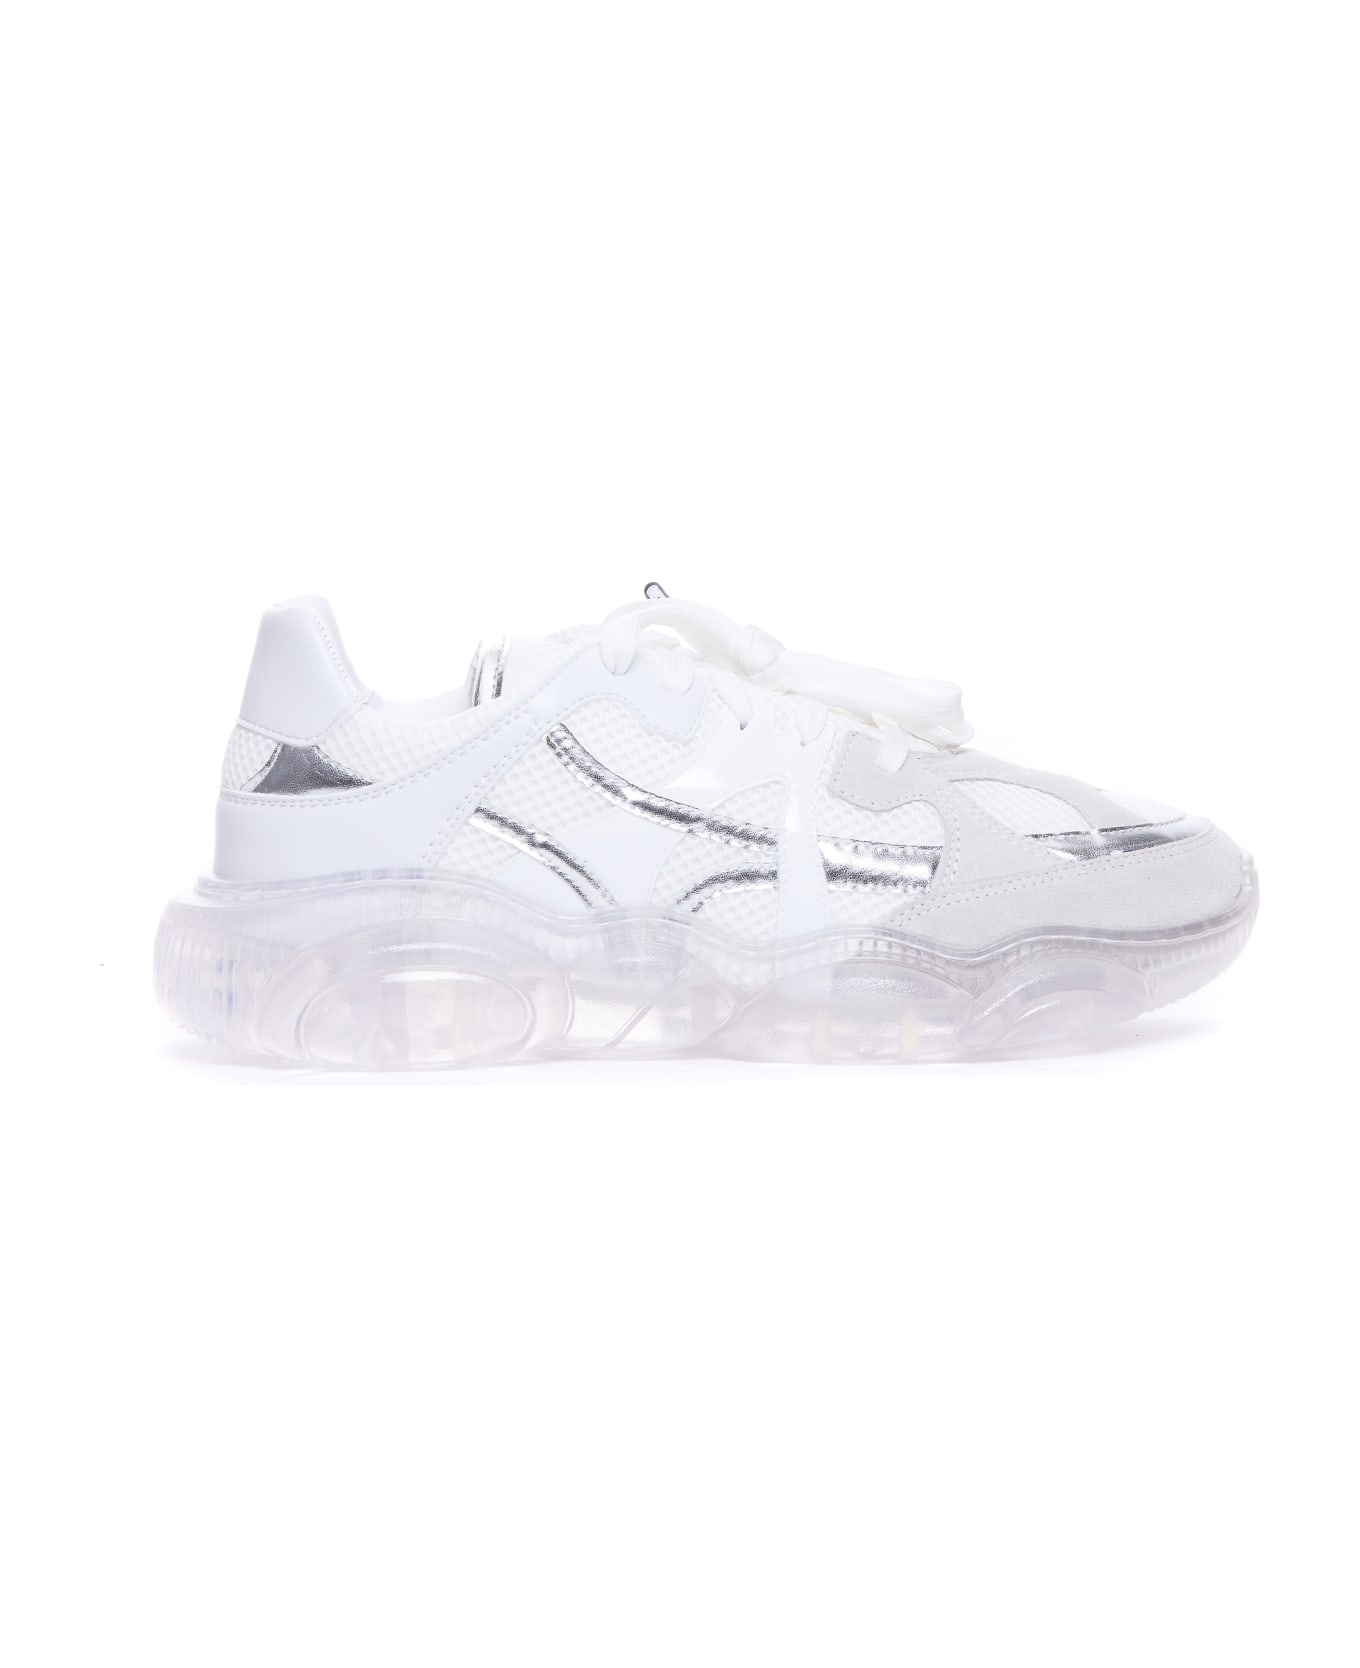 Moschino Teddy Shoes With Transparent Sole - White スニーカー